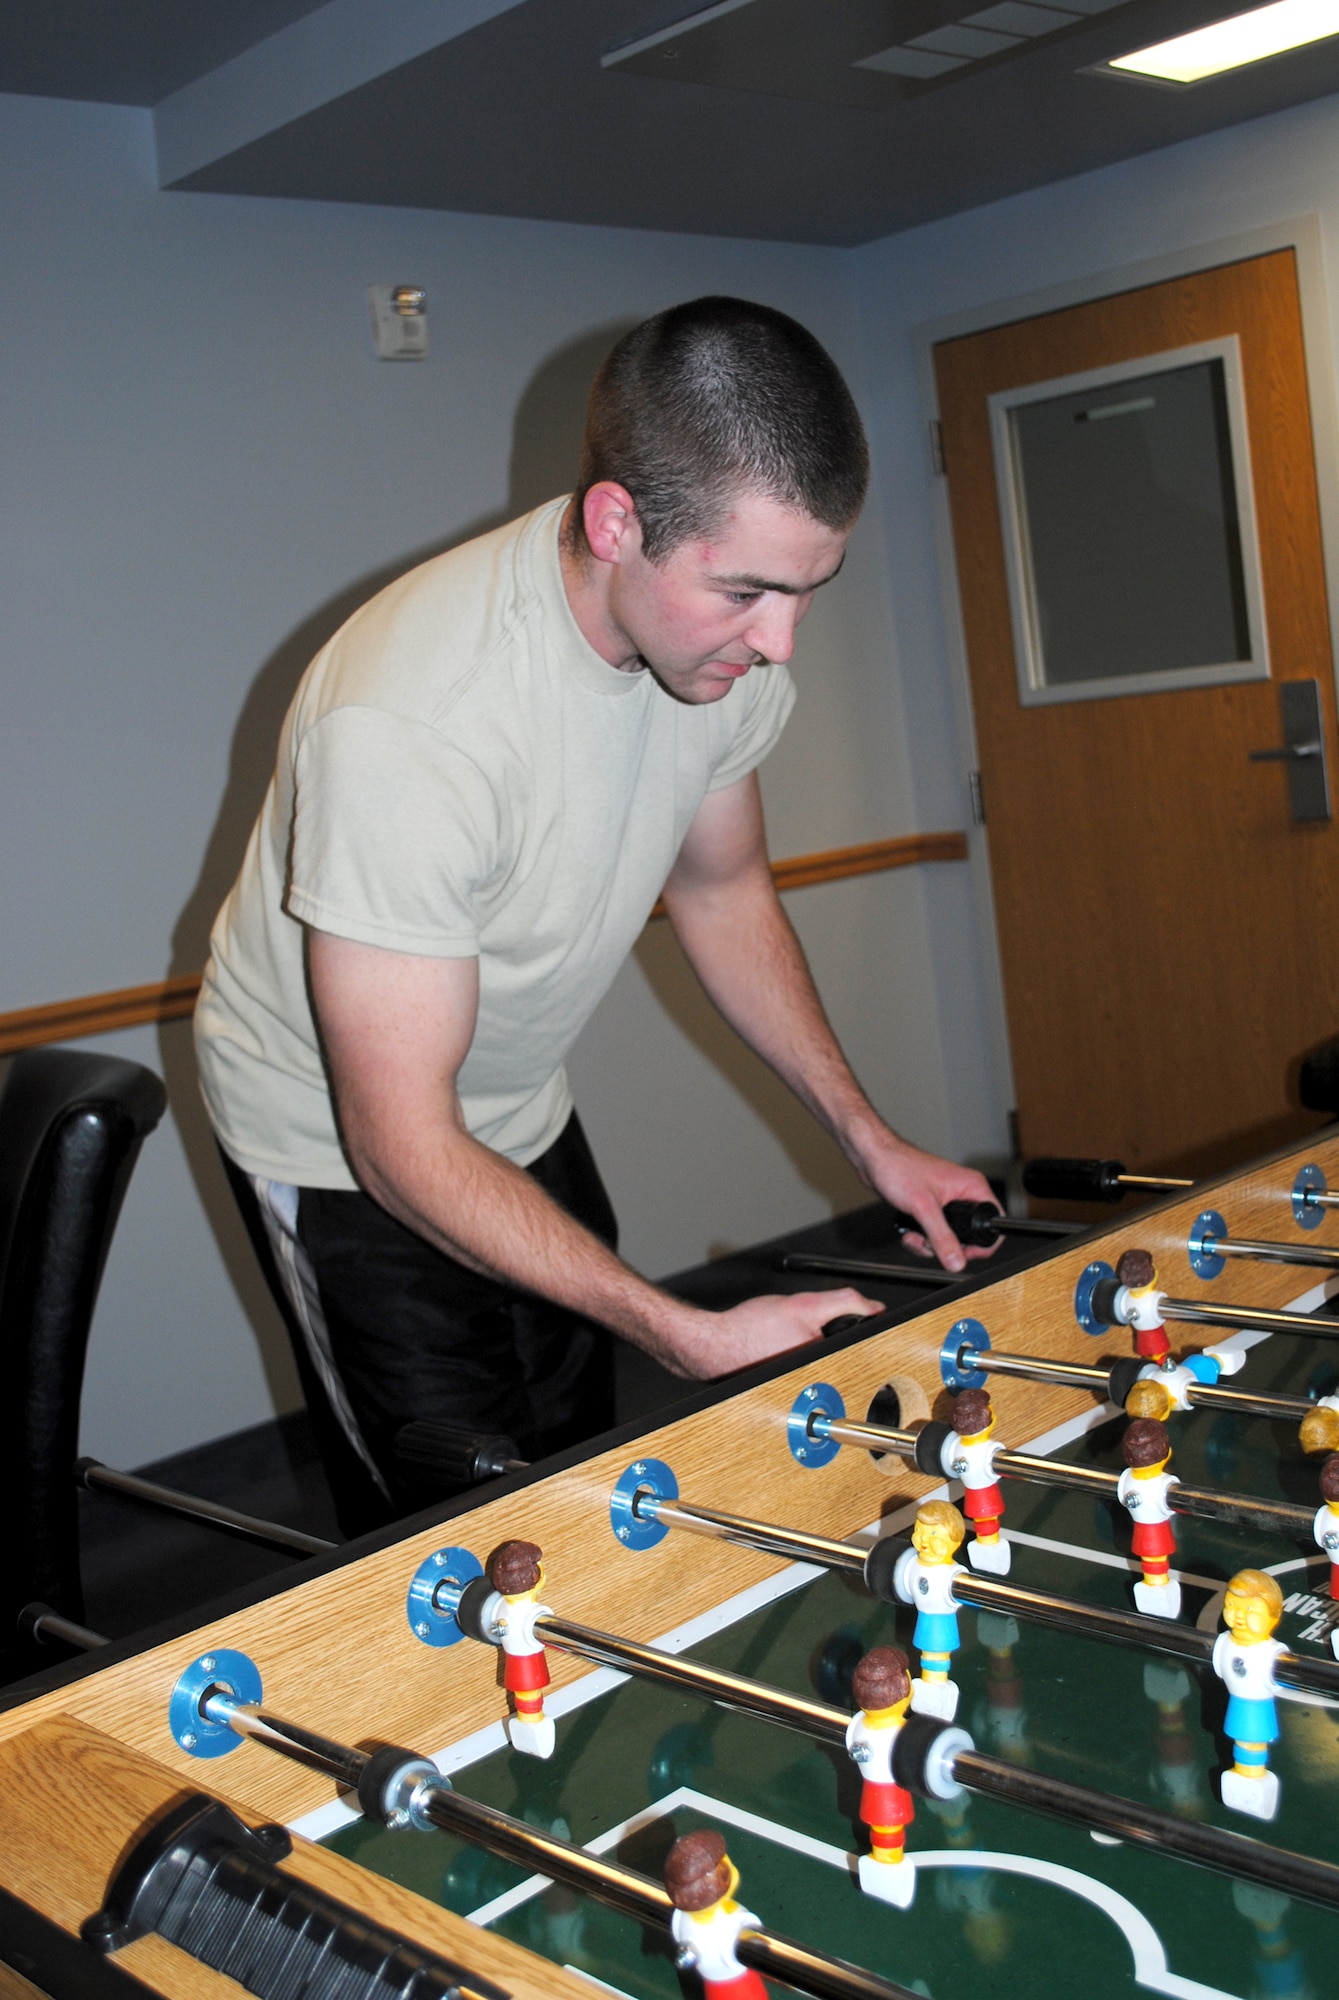 Airman 1st Class Tyler Johnson, 341st Logistics Readiness Squadron traffic management cargo apprentice and a first-term Airman, enjoys a game of foosball in a the game room of one of Malmstrom's dormitories.  (U.S. Air Force photo/Airman 1st Class Katrina Heikkinen)